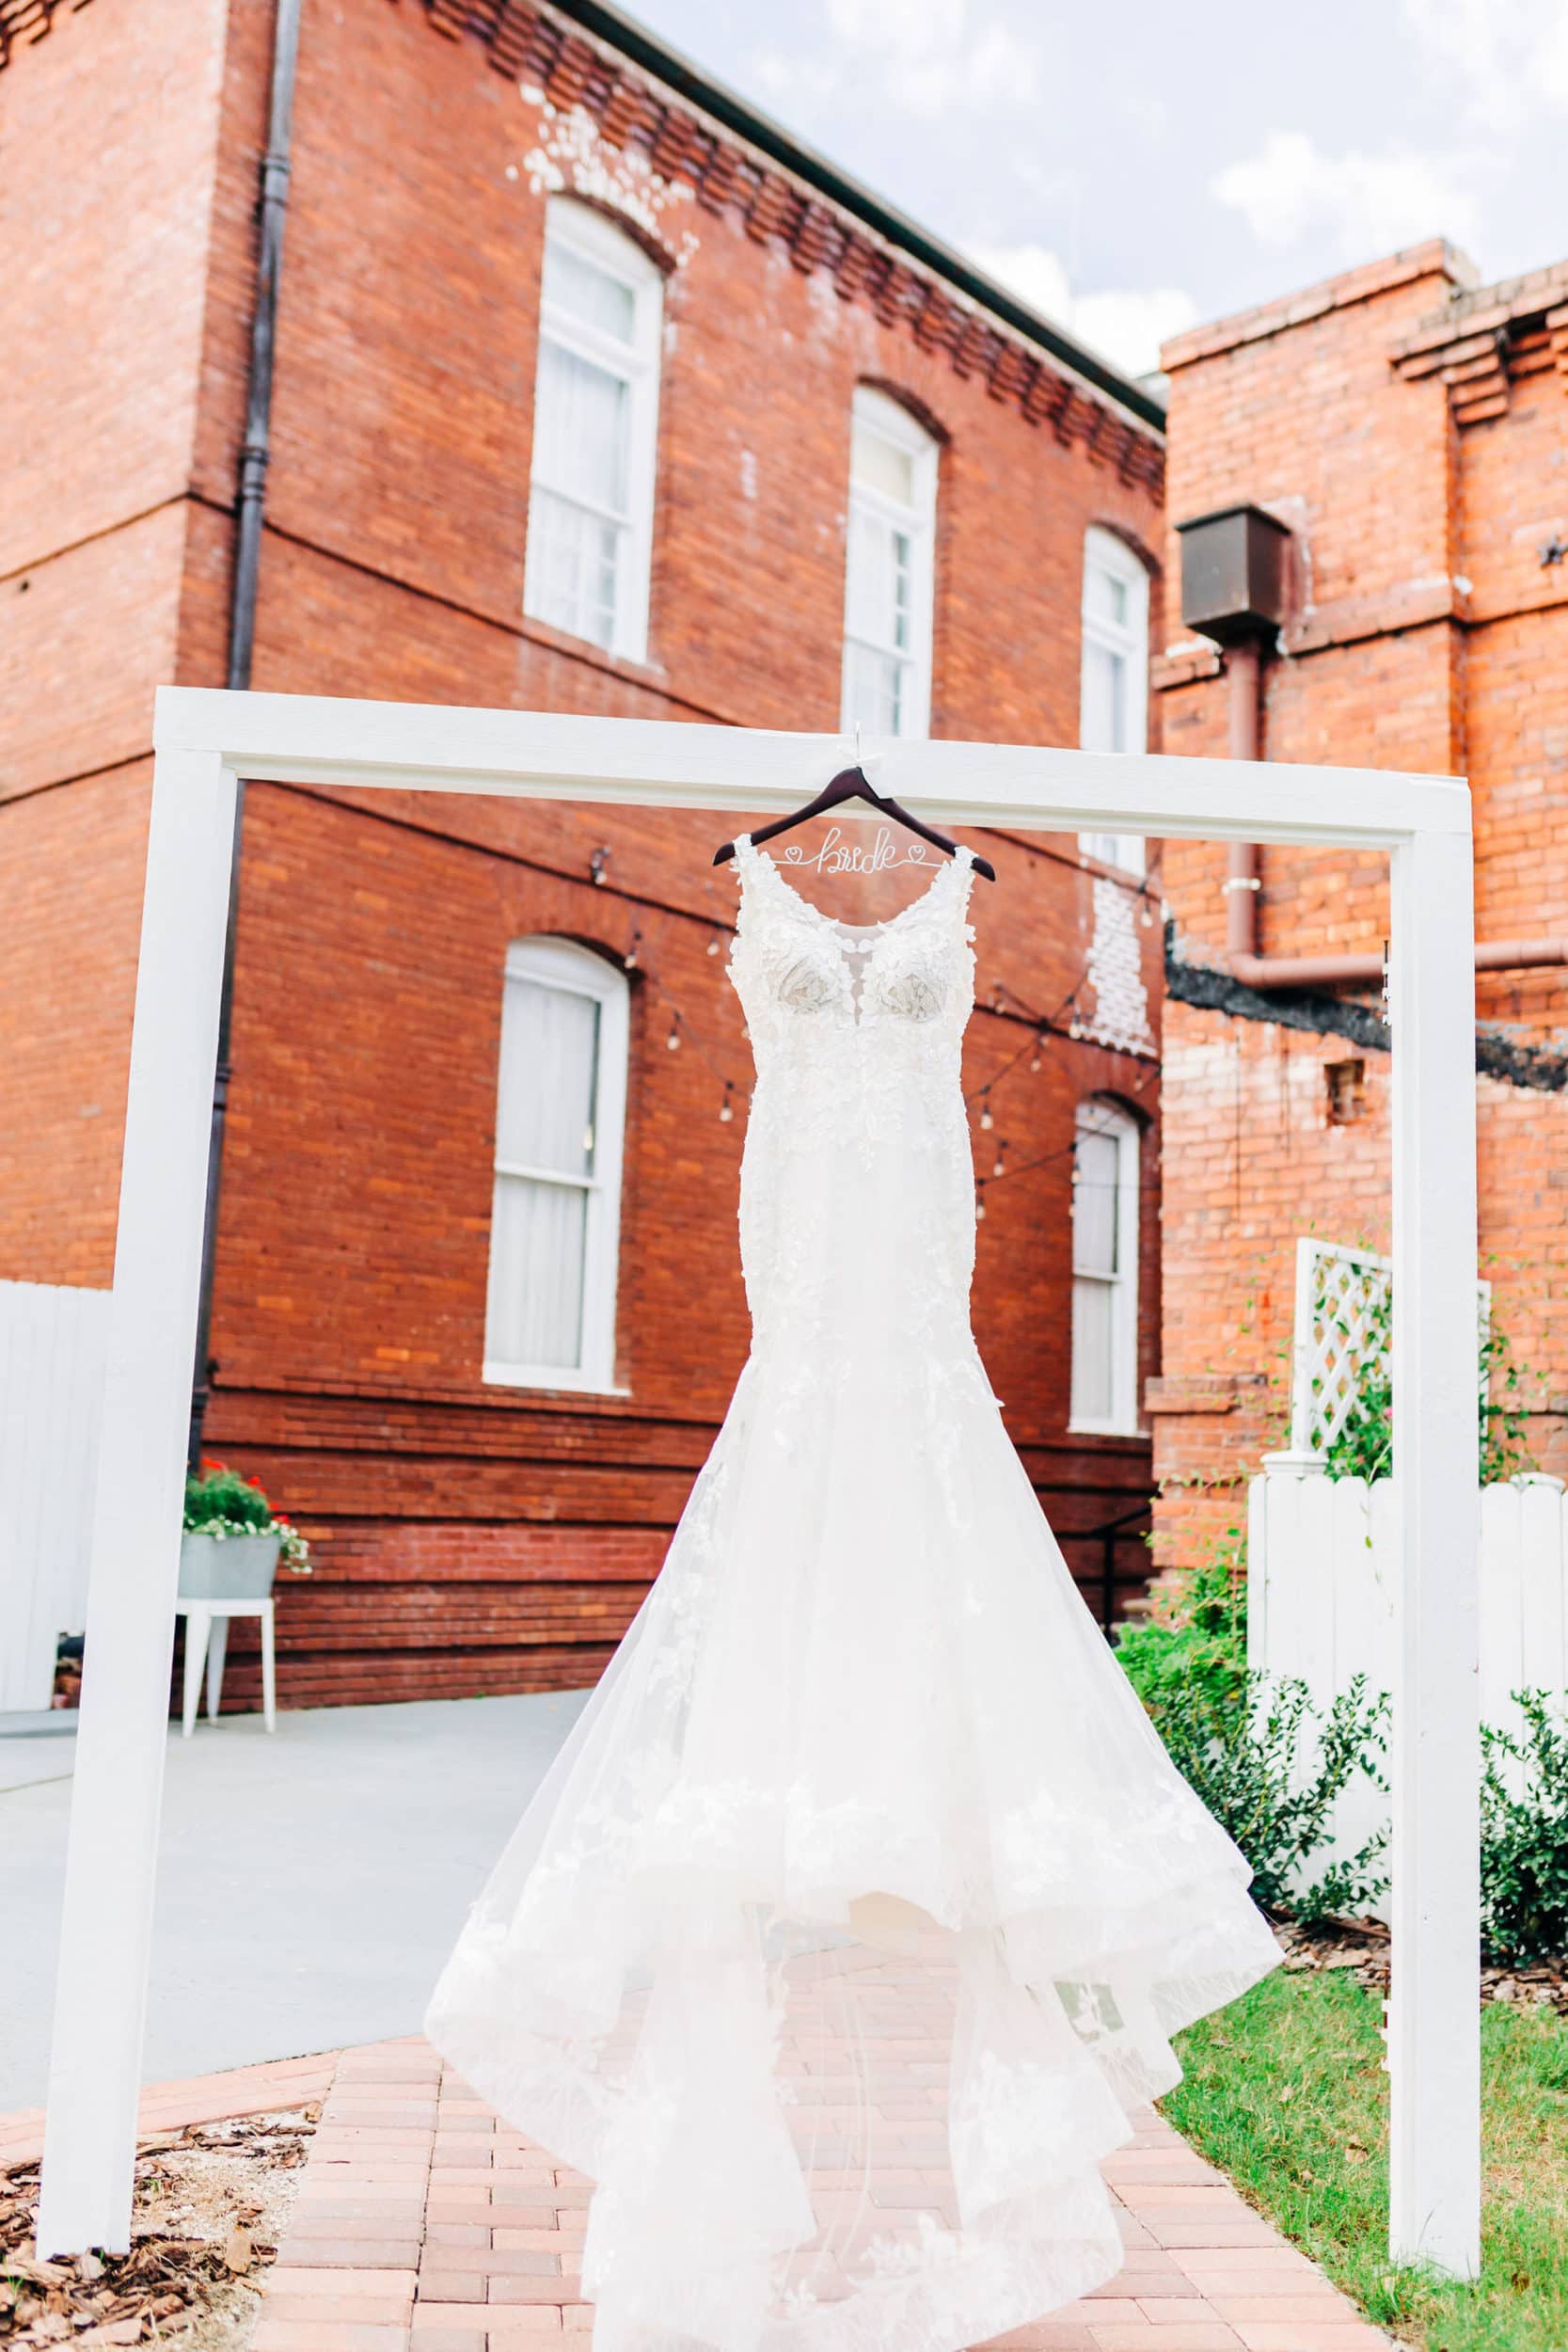 white bridal gown with white wood archway with large brick building with large white windows in background